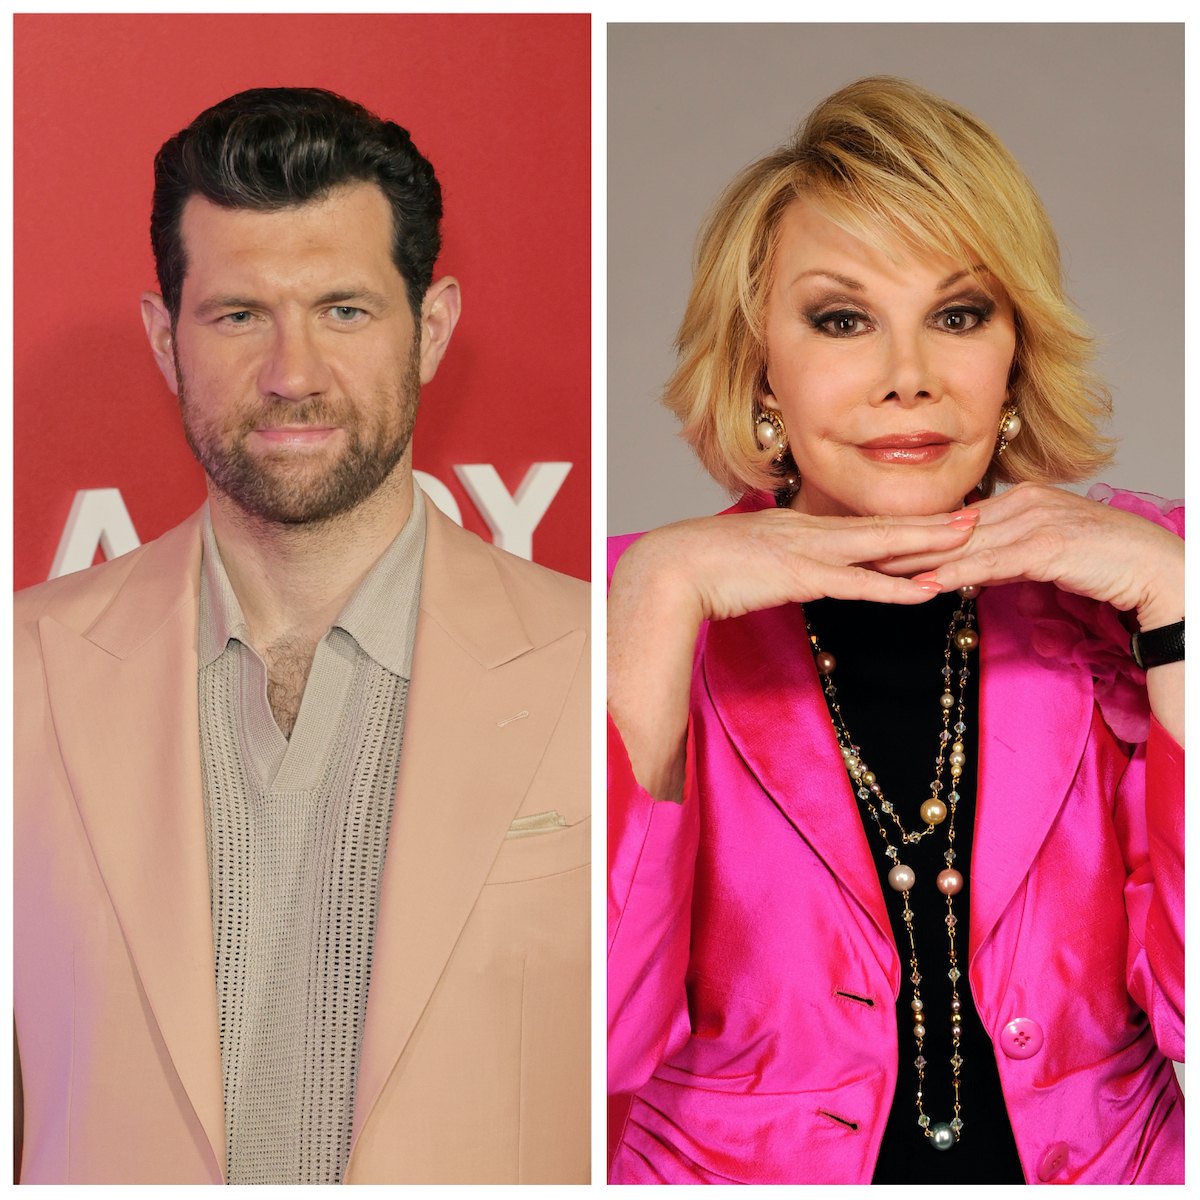 Billy Eichner and Joan Rivers posed at events